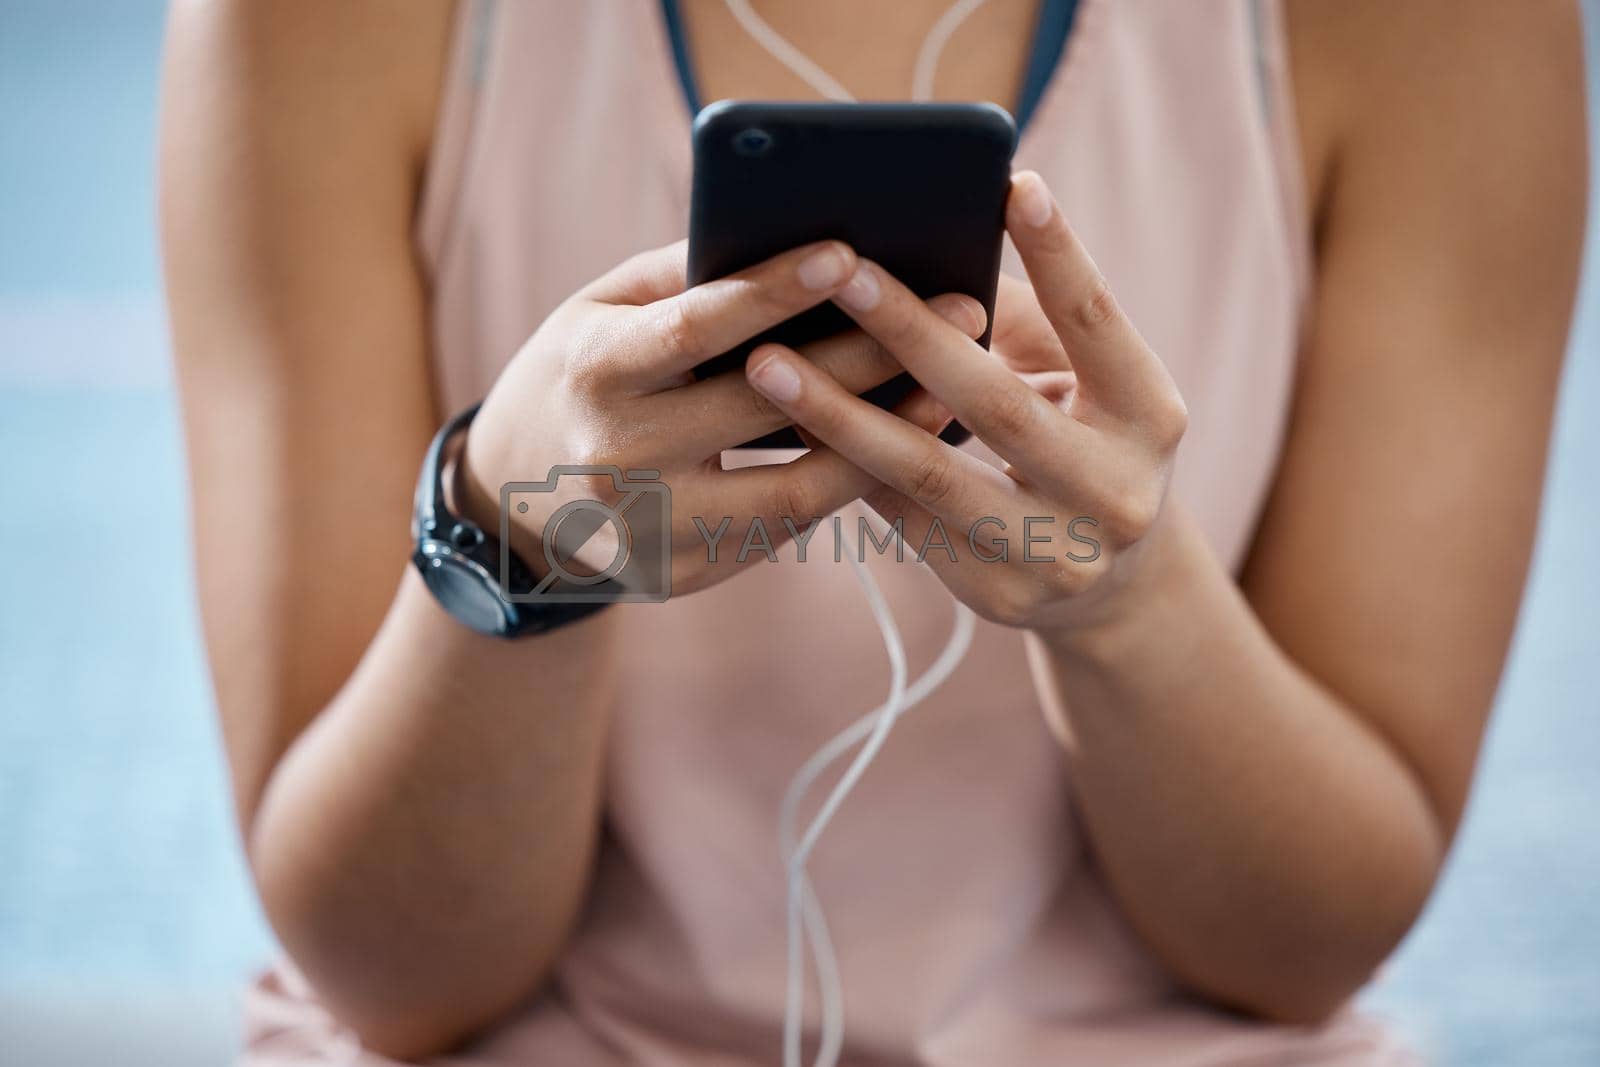 Fitness app, phone and communication while typing on phone in sportswear to track progress on smart device with fast network. Close up hands of a woman listening to music or podcast during training.